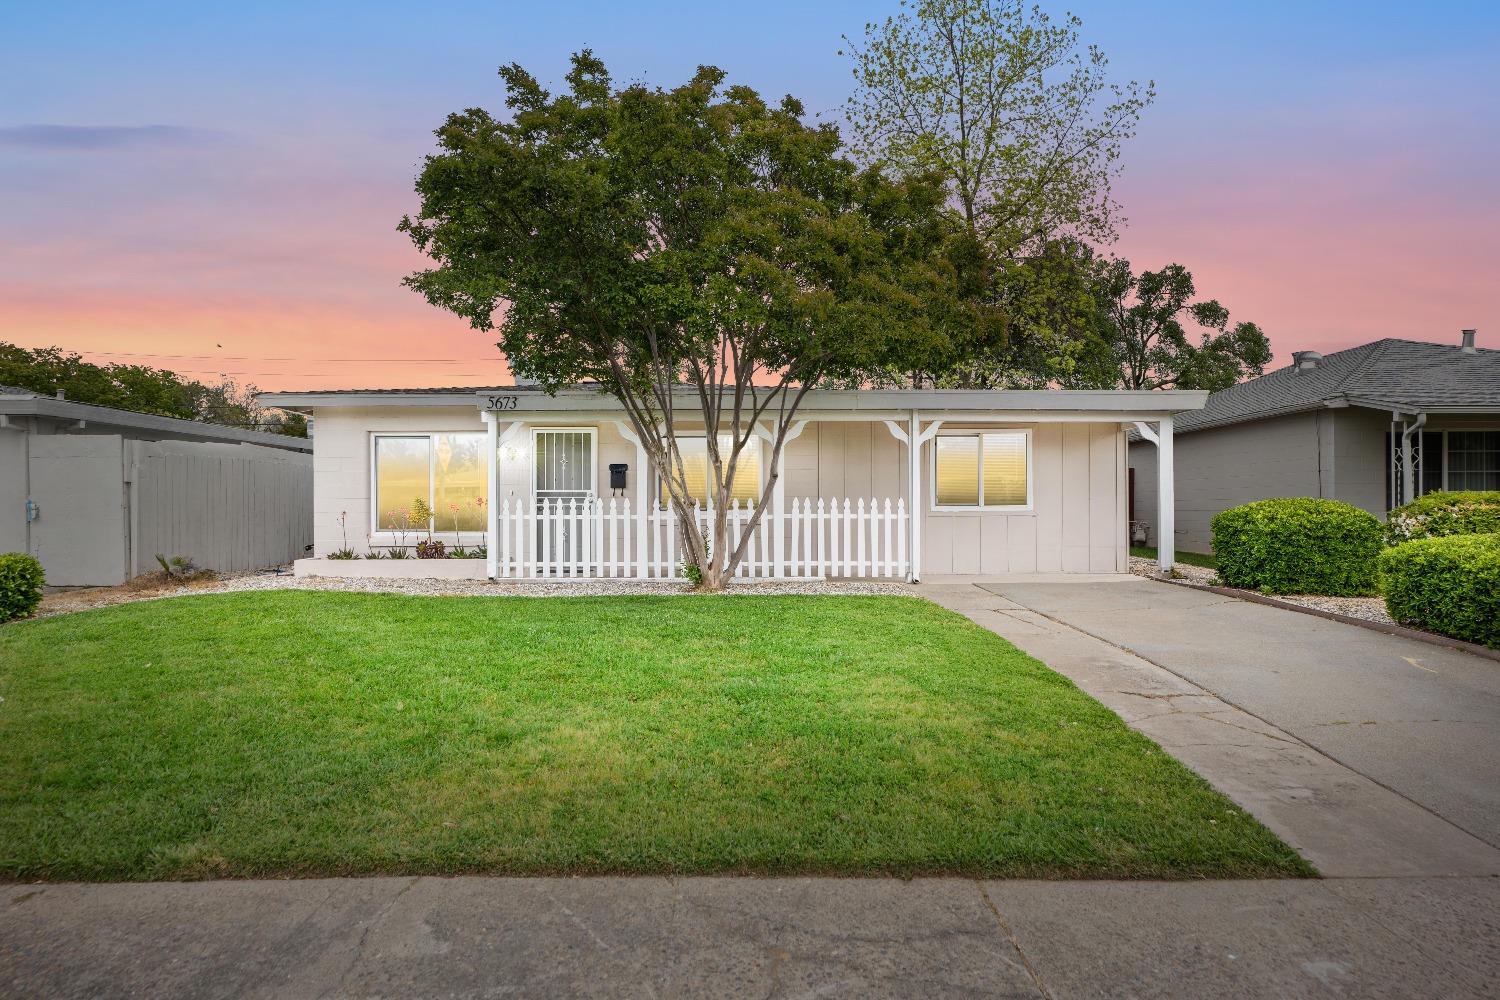 Get ready to experience Sacramento living in the highly sought neighborhood of Mangan Park! This cha